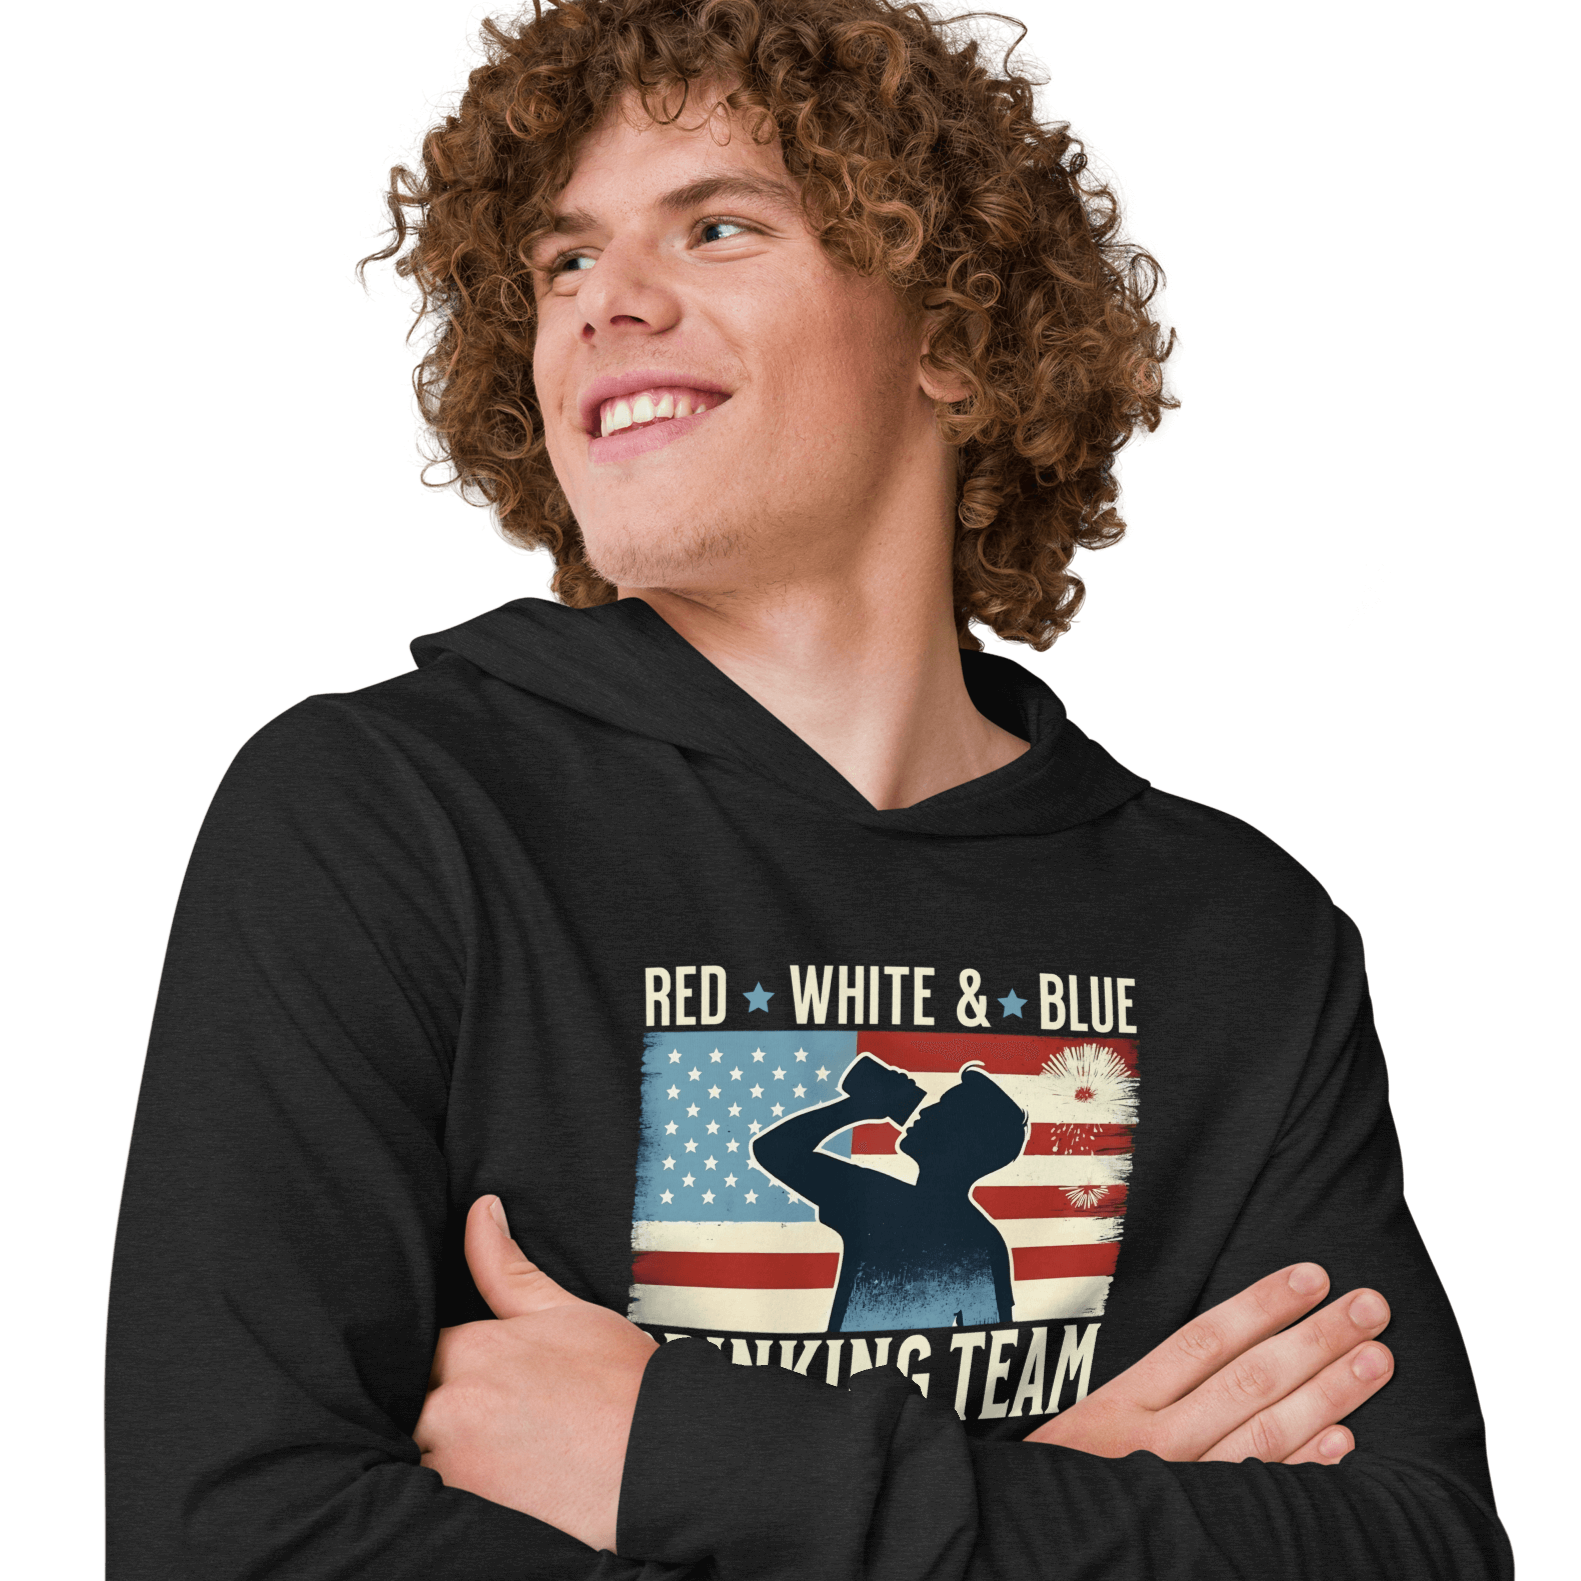 Lightweight hoodie with Red White and Blue Drinking Team text, man drinking beer, and distressed American flag background. Perfect for 4th of July.